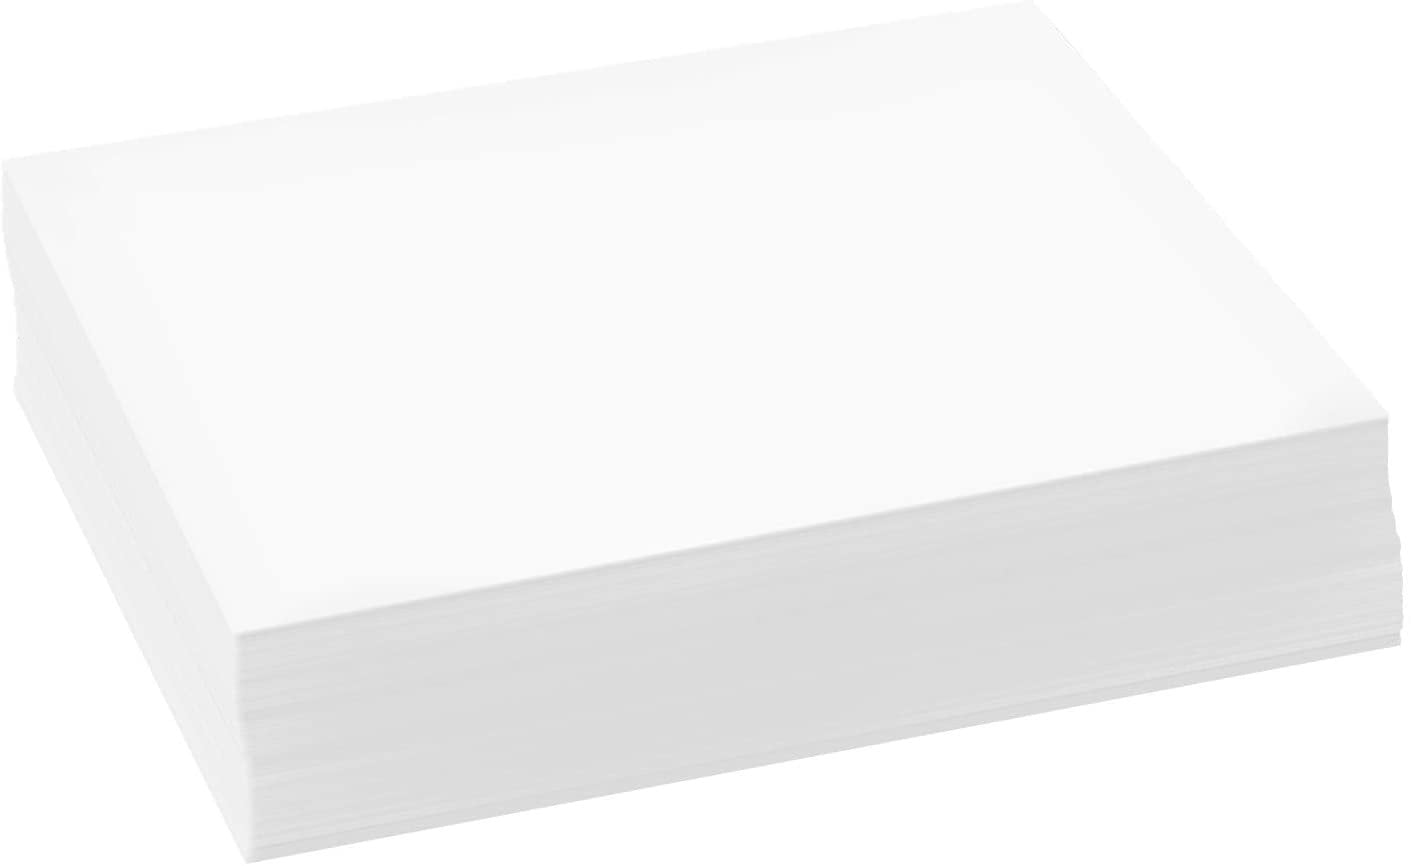  500 Sheets of Bright White 8.5 x 5.5 Half letter Size,  Regular 24lb. Paper : Office Products